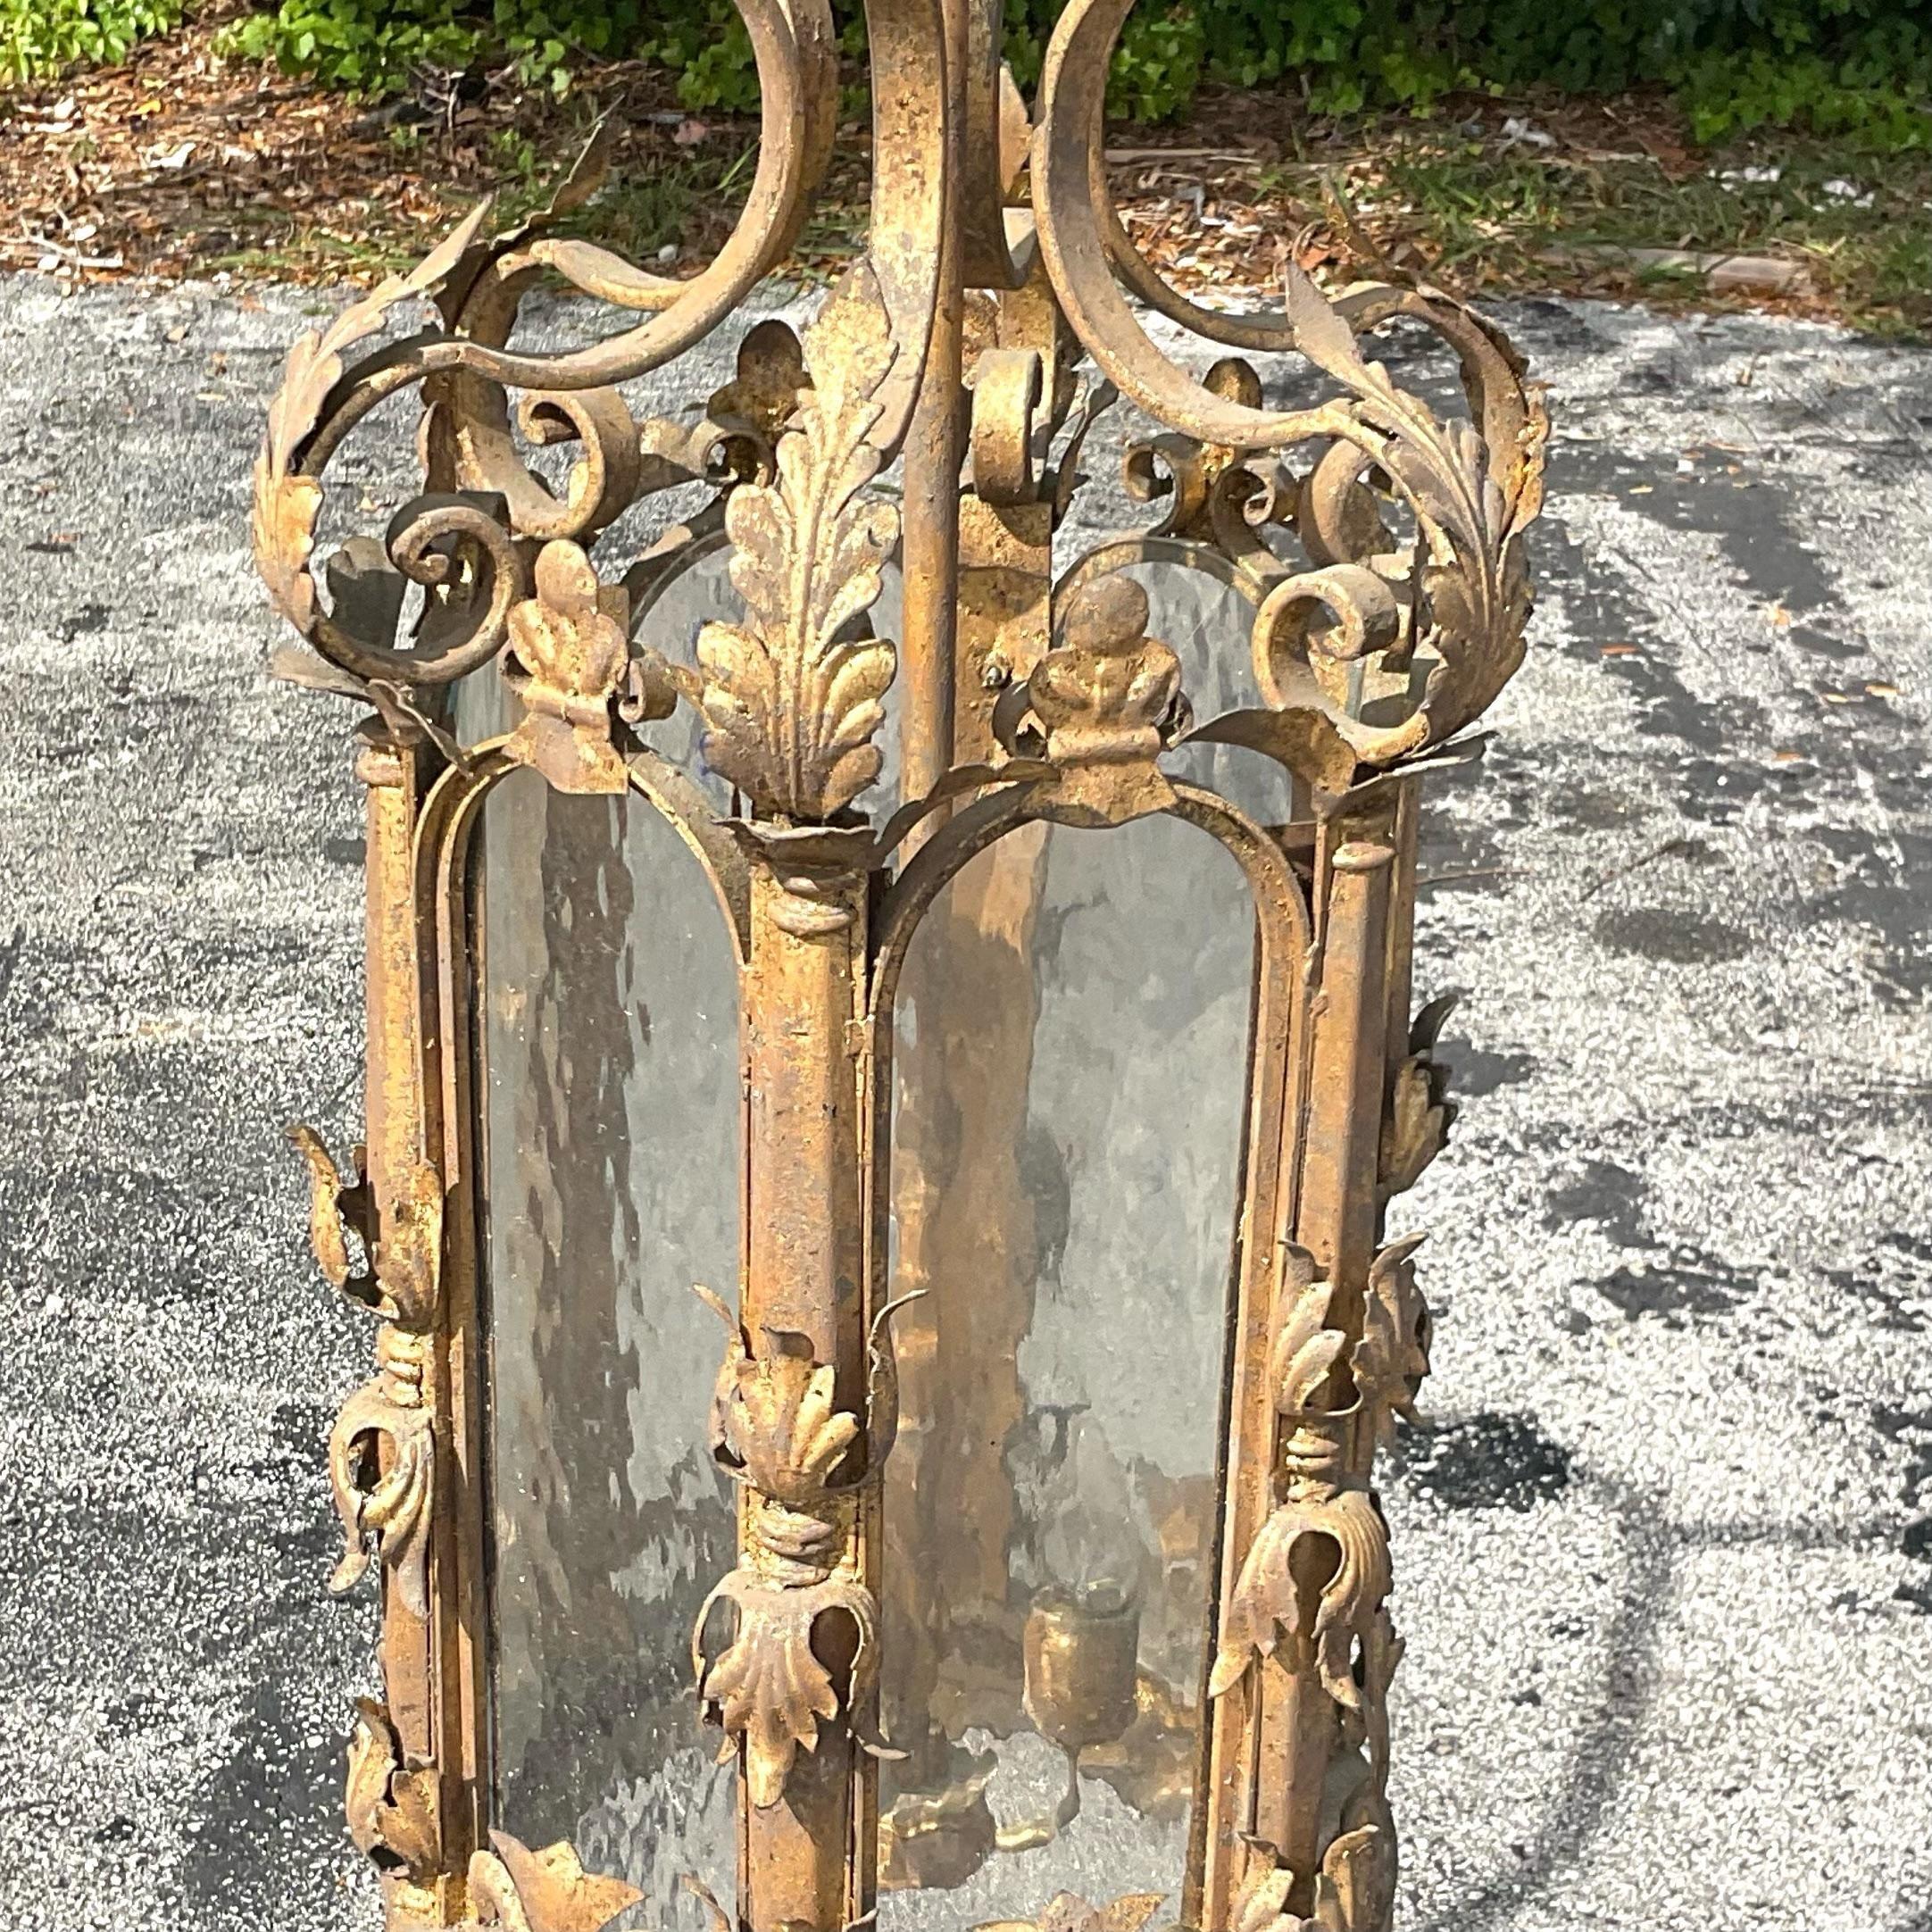 Amazing gilt French style hanging lantern with leaf appliqué. The lantern has rippled glass in each of the intricate 6 arched openings. Fantastic touch of glamour for any space. Acquired from a Palm Beach estate.